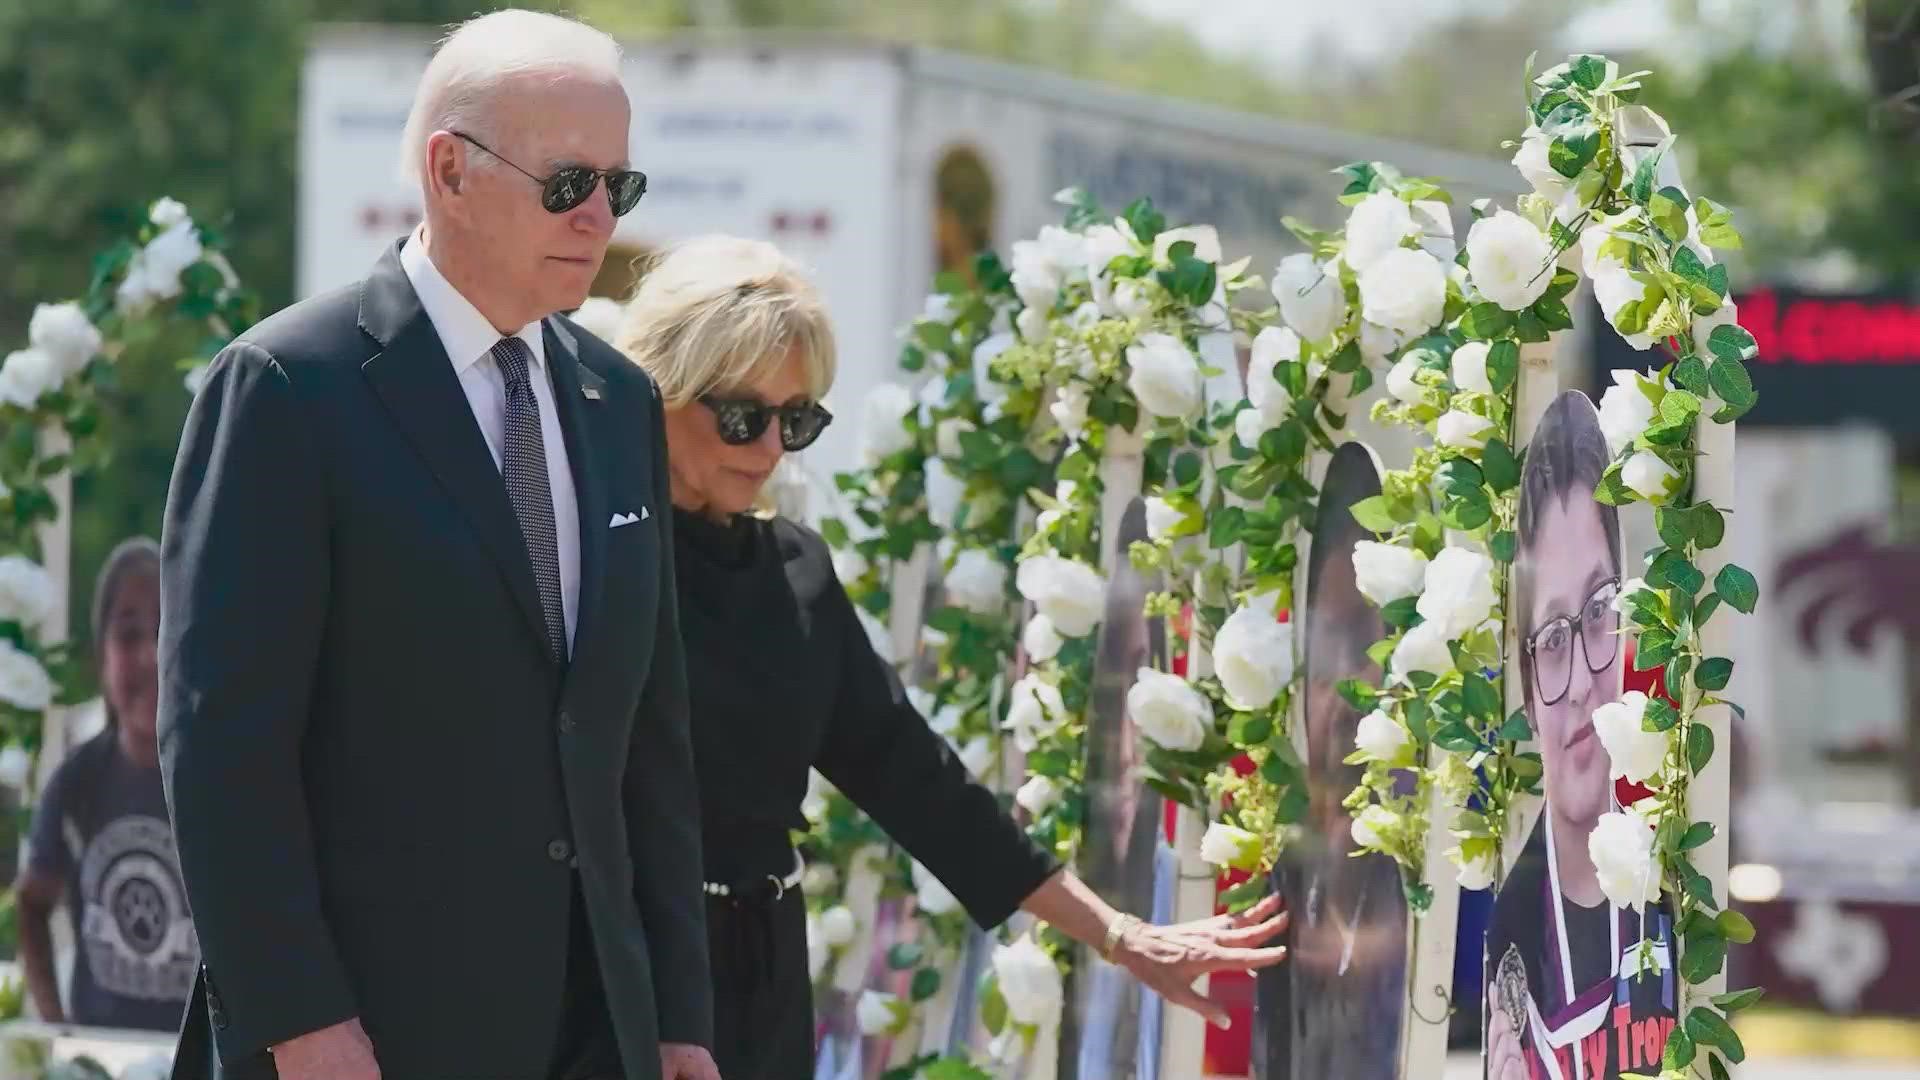 The Bidens paid their respects to the 21 victims, and worshiped the community.